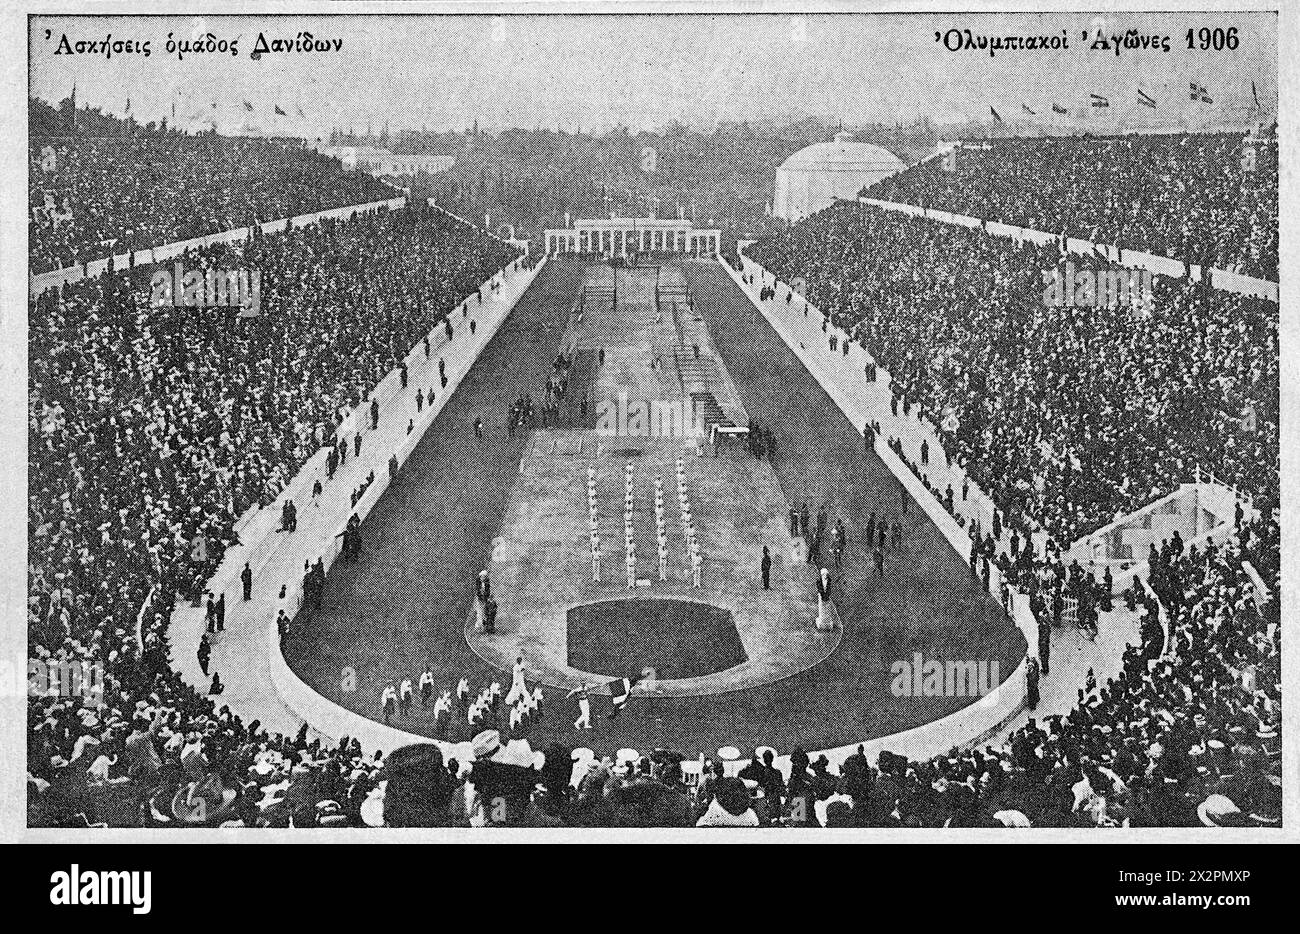 Opening day of the Games, 22nd April 1906 - Postcard published on the occasion of the 1906 Olympic Games in Athens, Greece Stock Photo